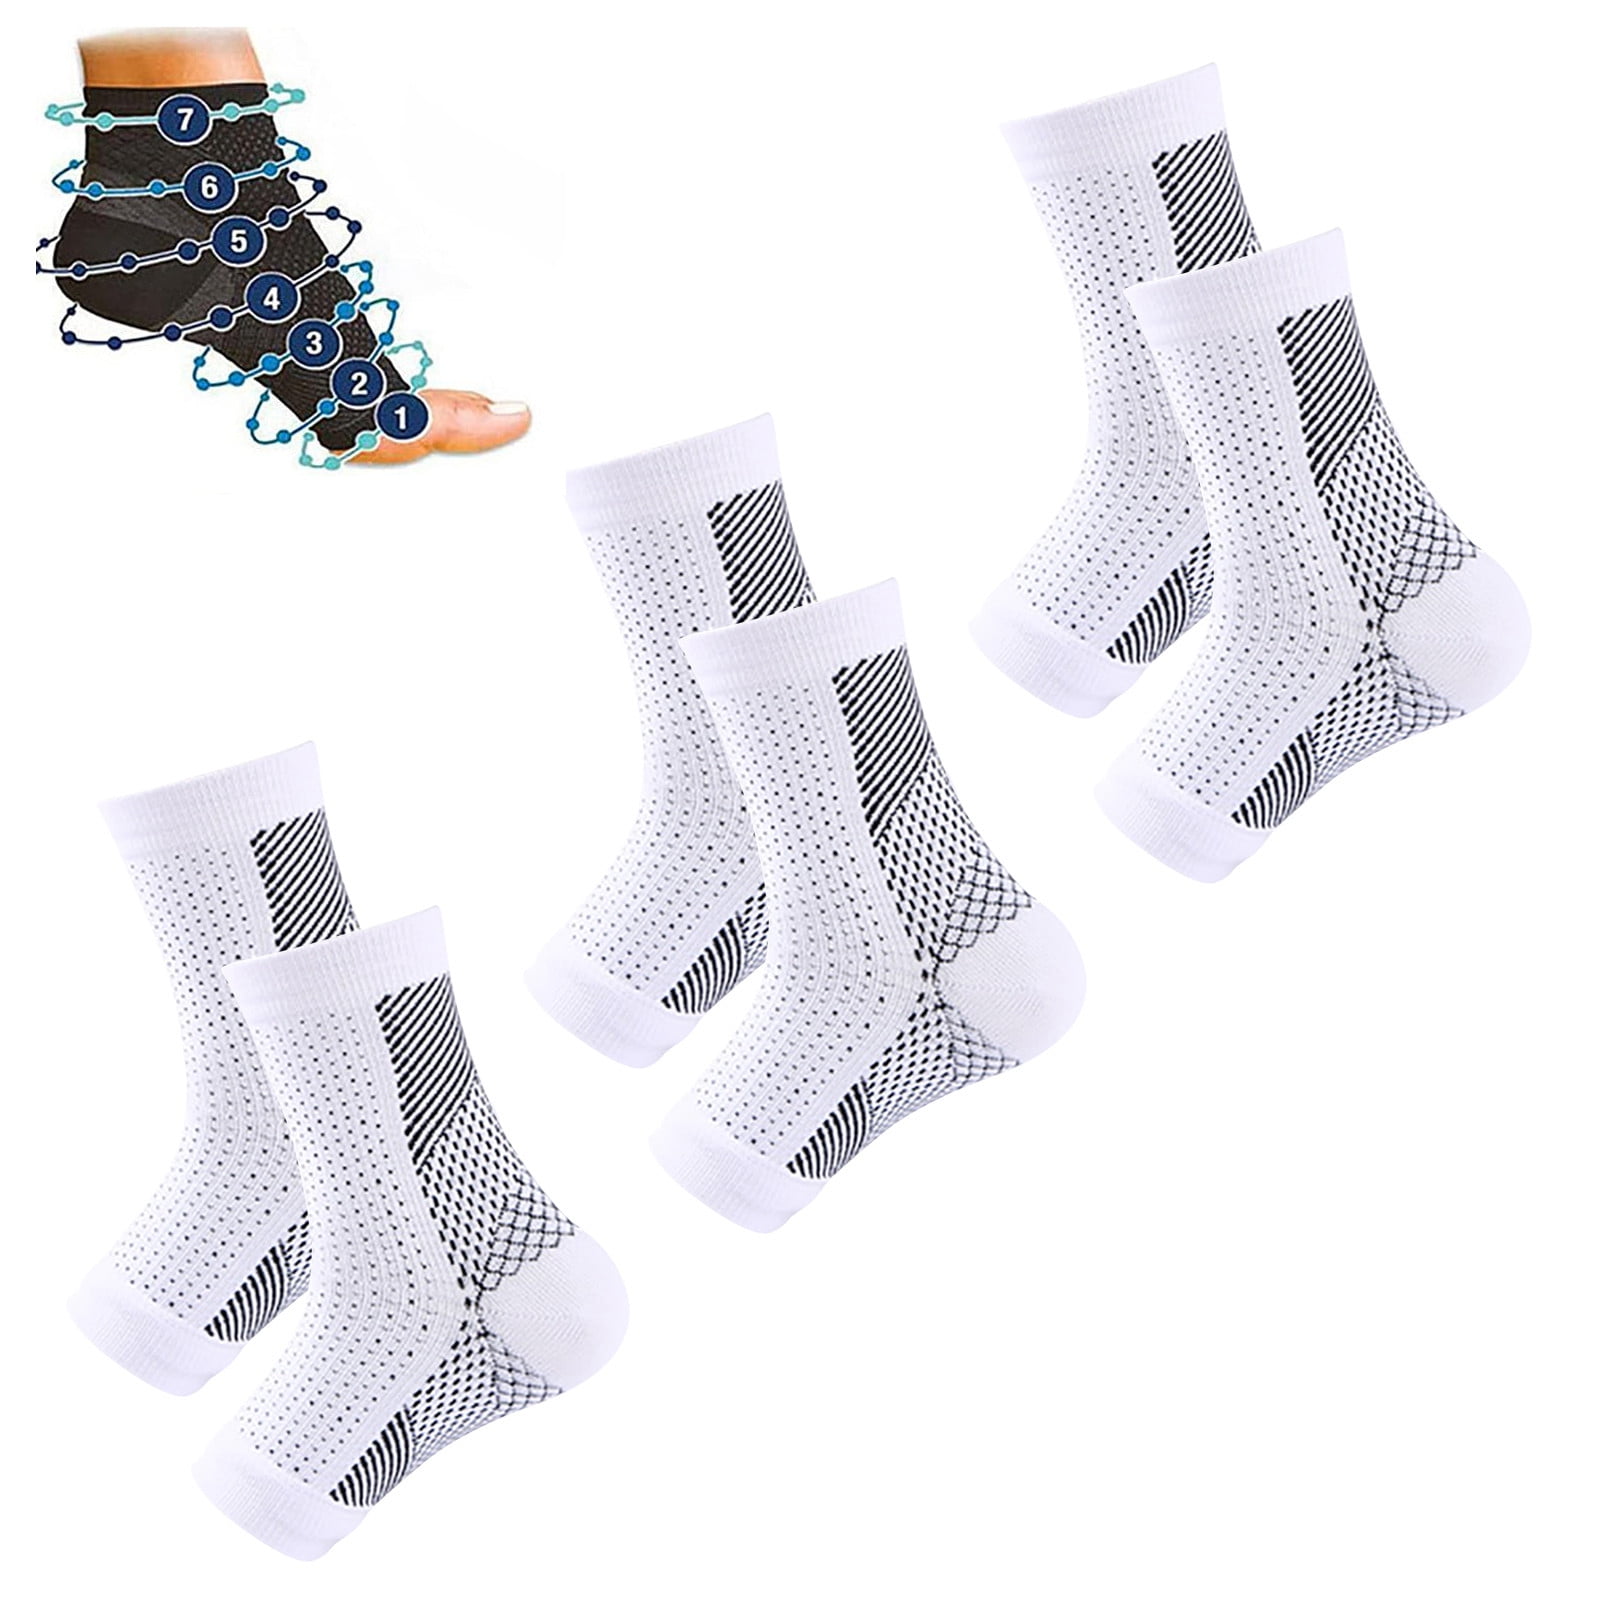 Orthopaedic Compression Socks Foot Compression Ankle Support Plantar ...